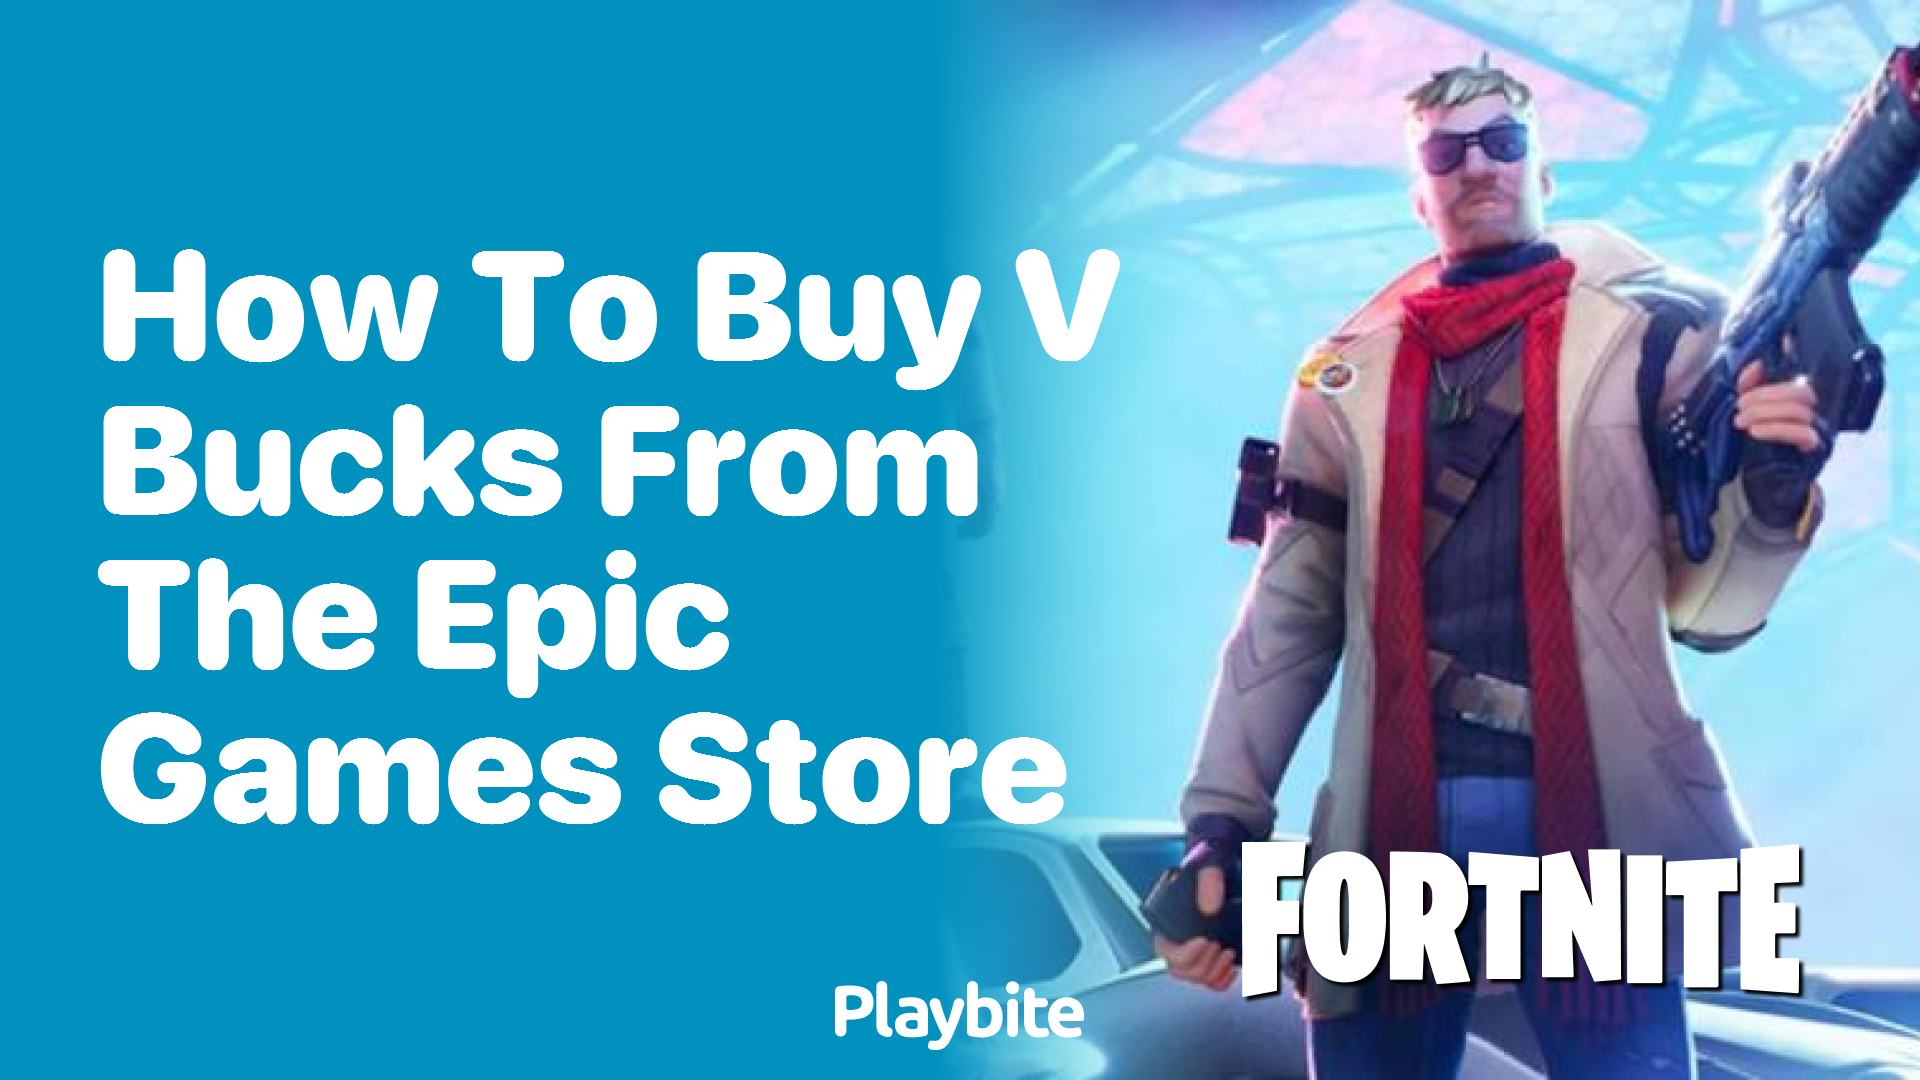 How to Buy V-Bucks from the Epic Games Store